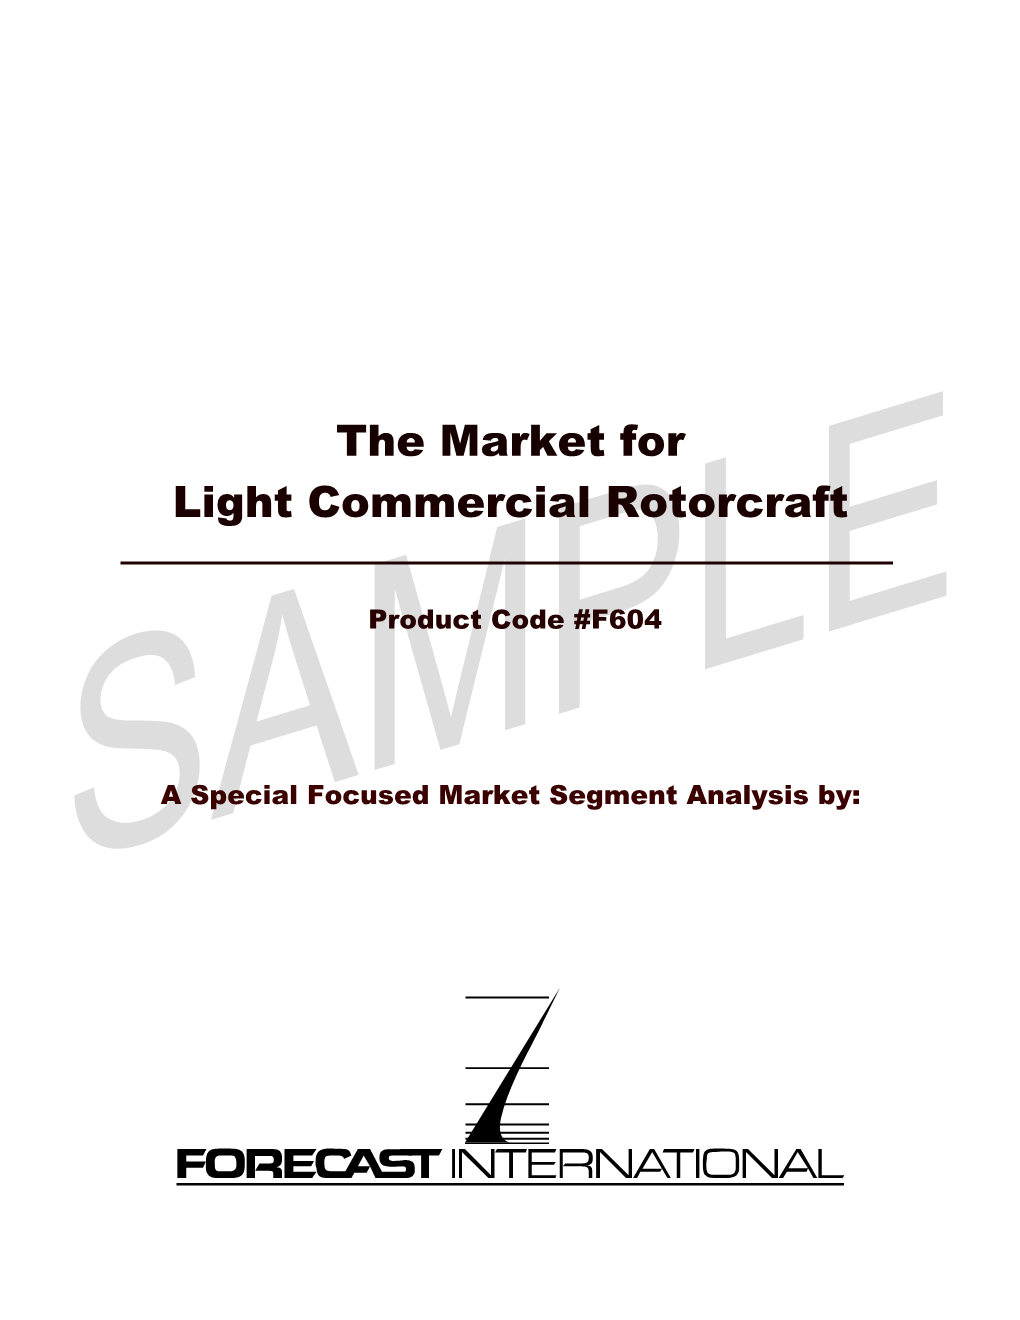 The Market for Light Commercial Rotorcraft